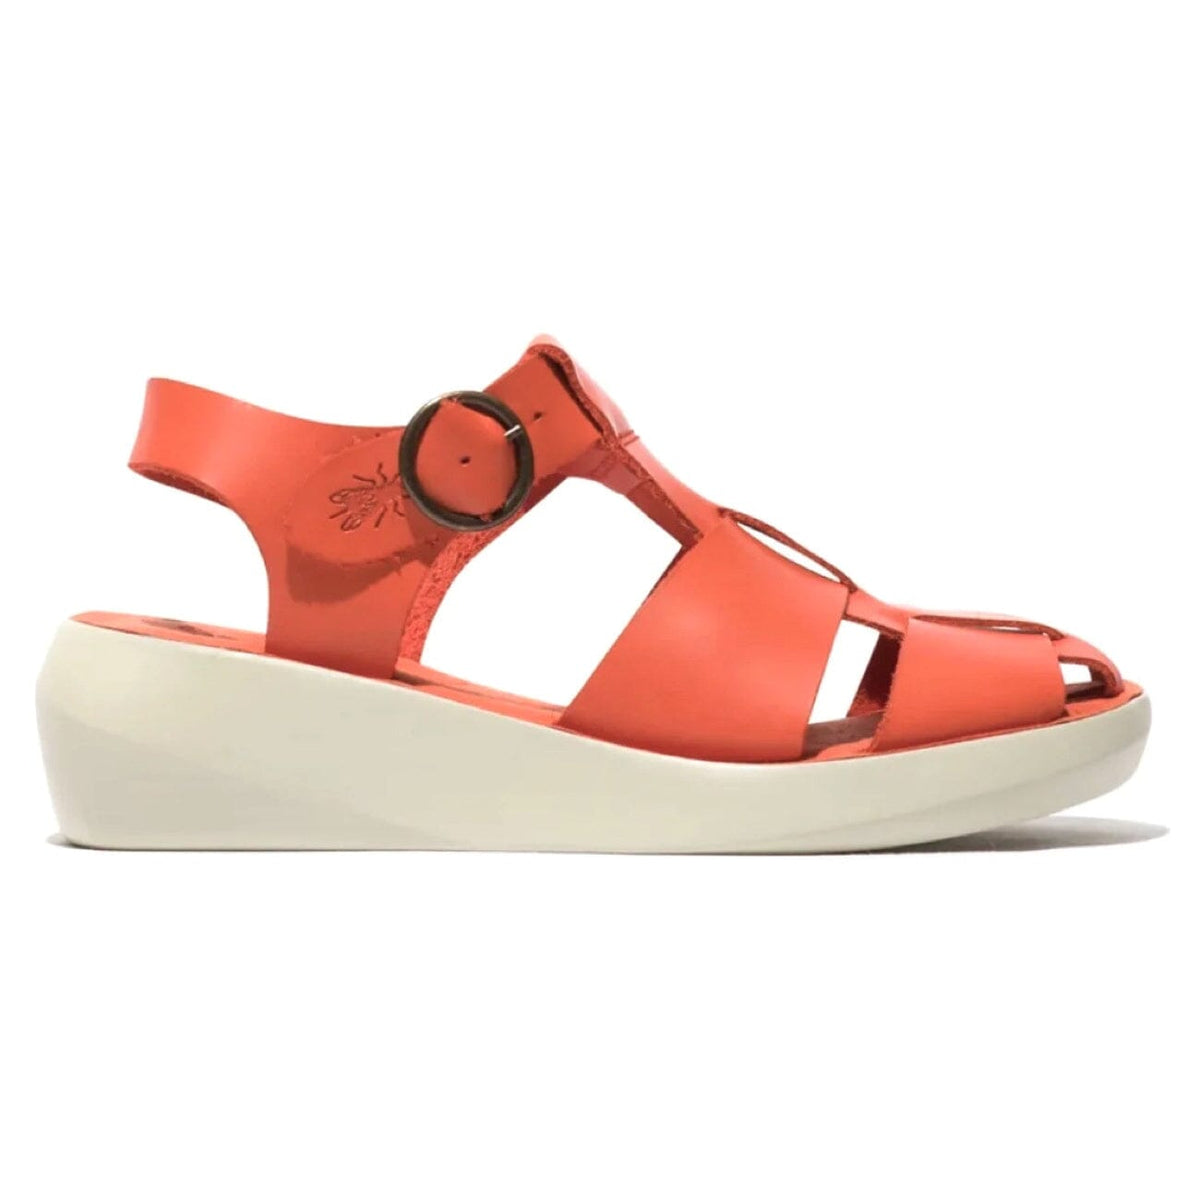 Fly London, BAWE842, Sandal, Leather, Coral Sandals Fly London 